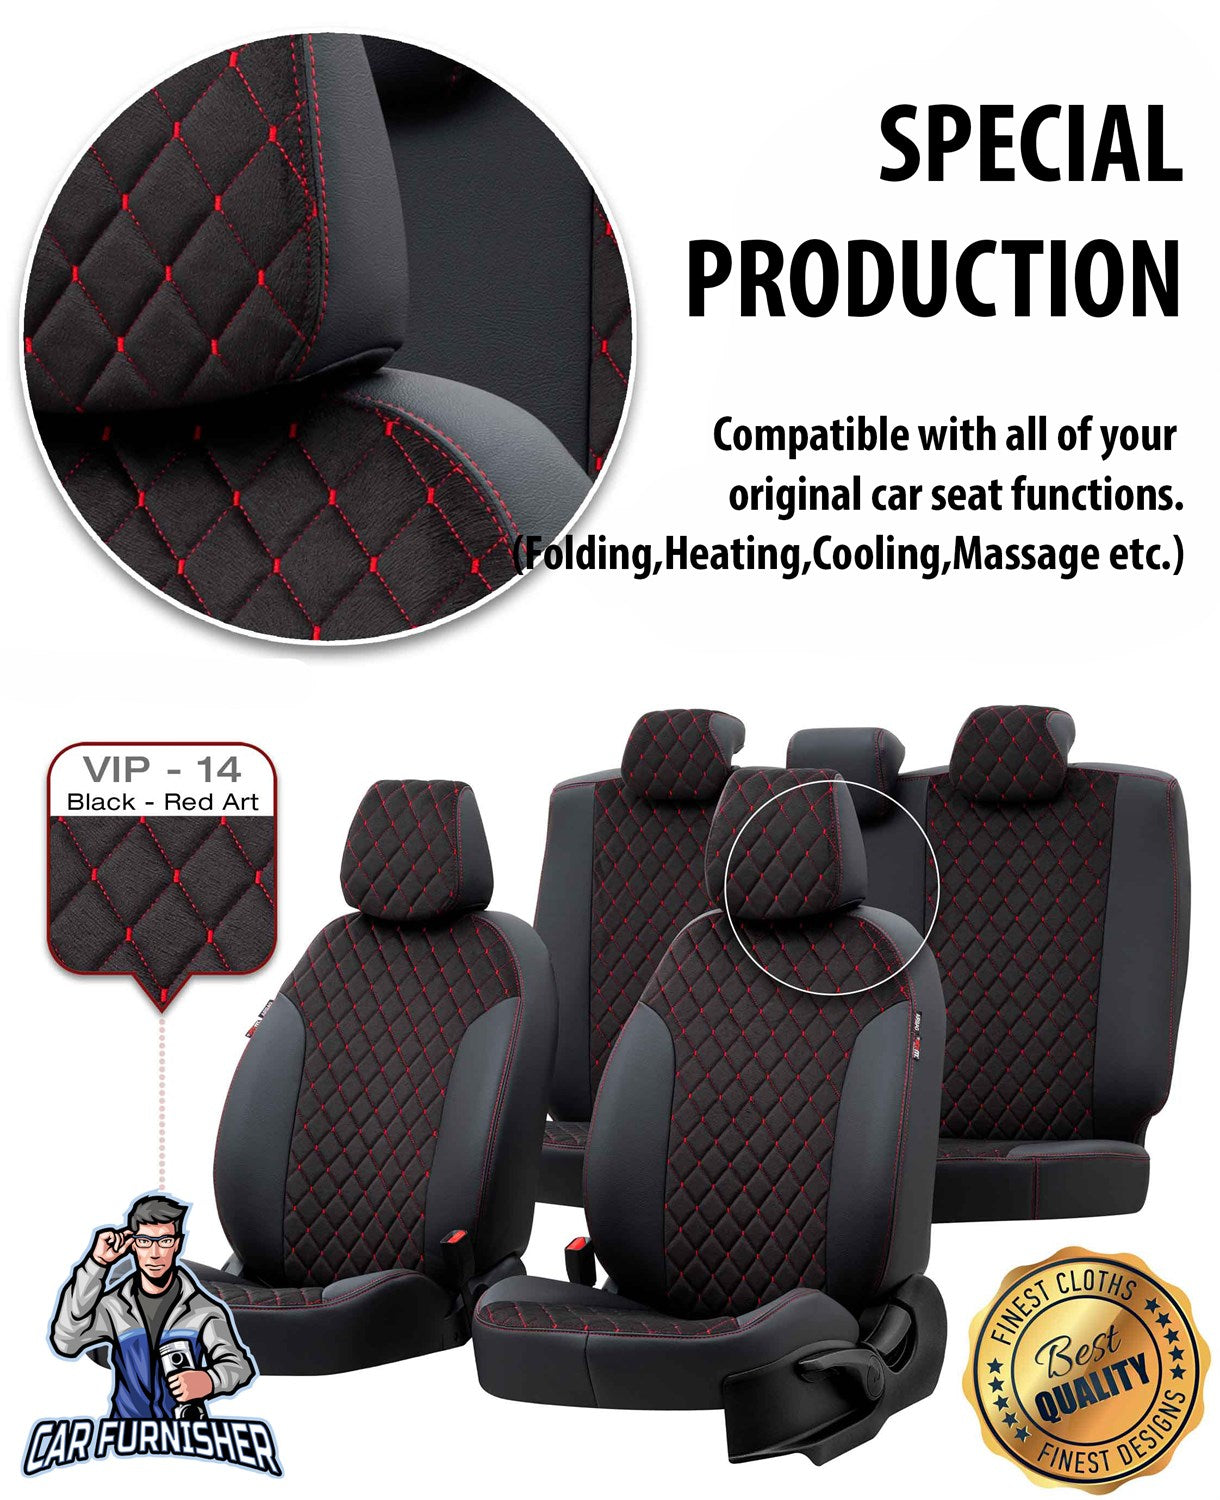 Seat Leon Seat Covers Madrid Foal Feather Design Dark Red Leather & Foal Feather